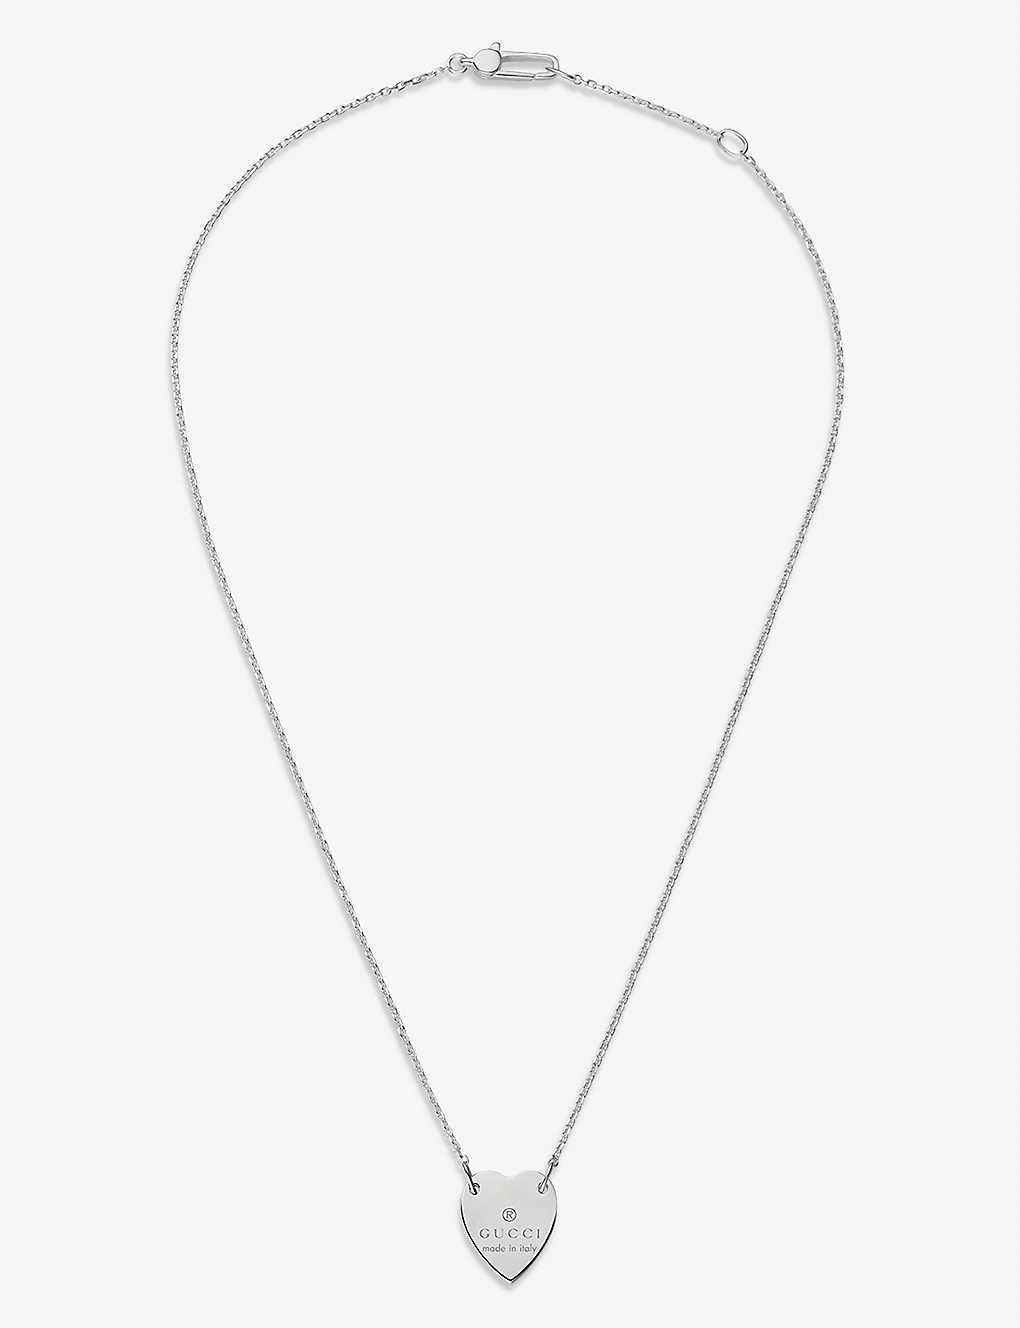 Trademark sterling silver heart pendant necklace(3501660)